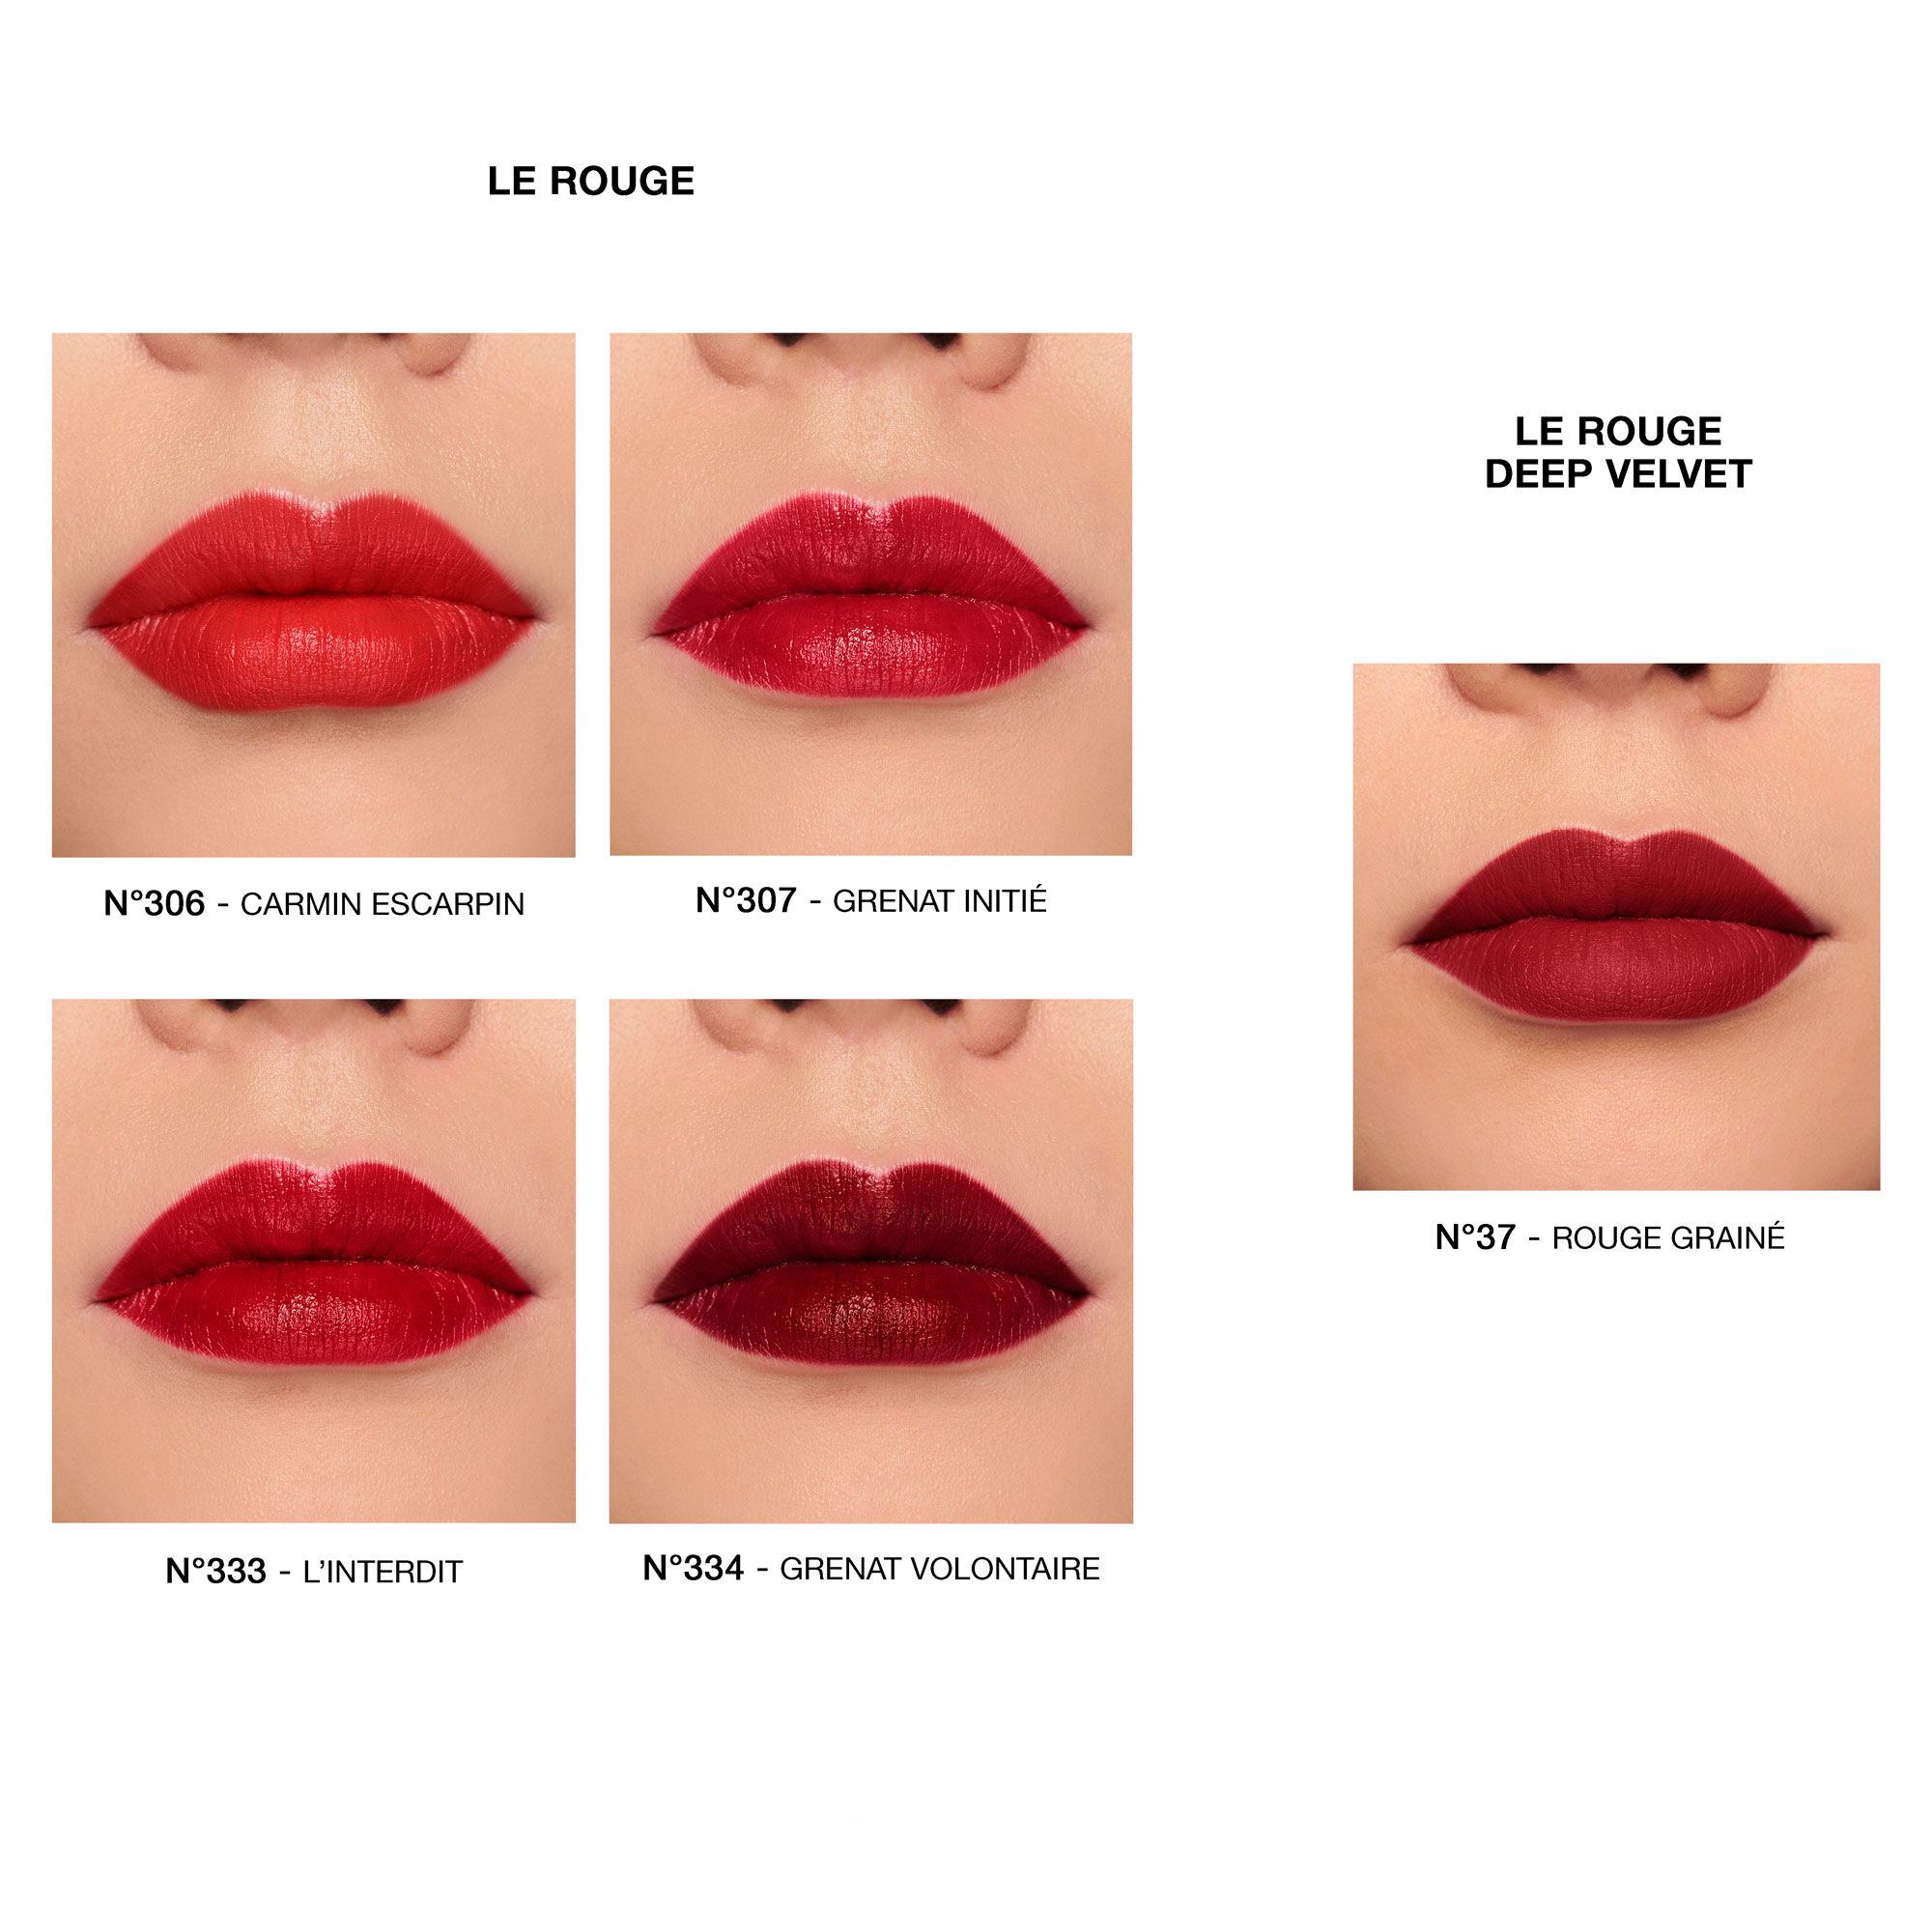 Le Rouge Deep Velvet Matte Lipstick Refill • The new powdery matte and  highly pigmented couture lipstick by Givenchy ∷ GIVENCHY